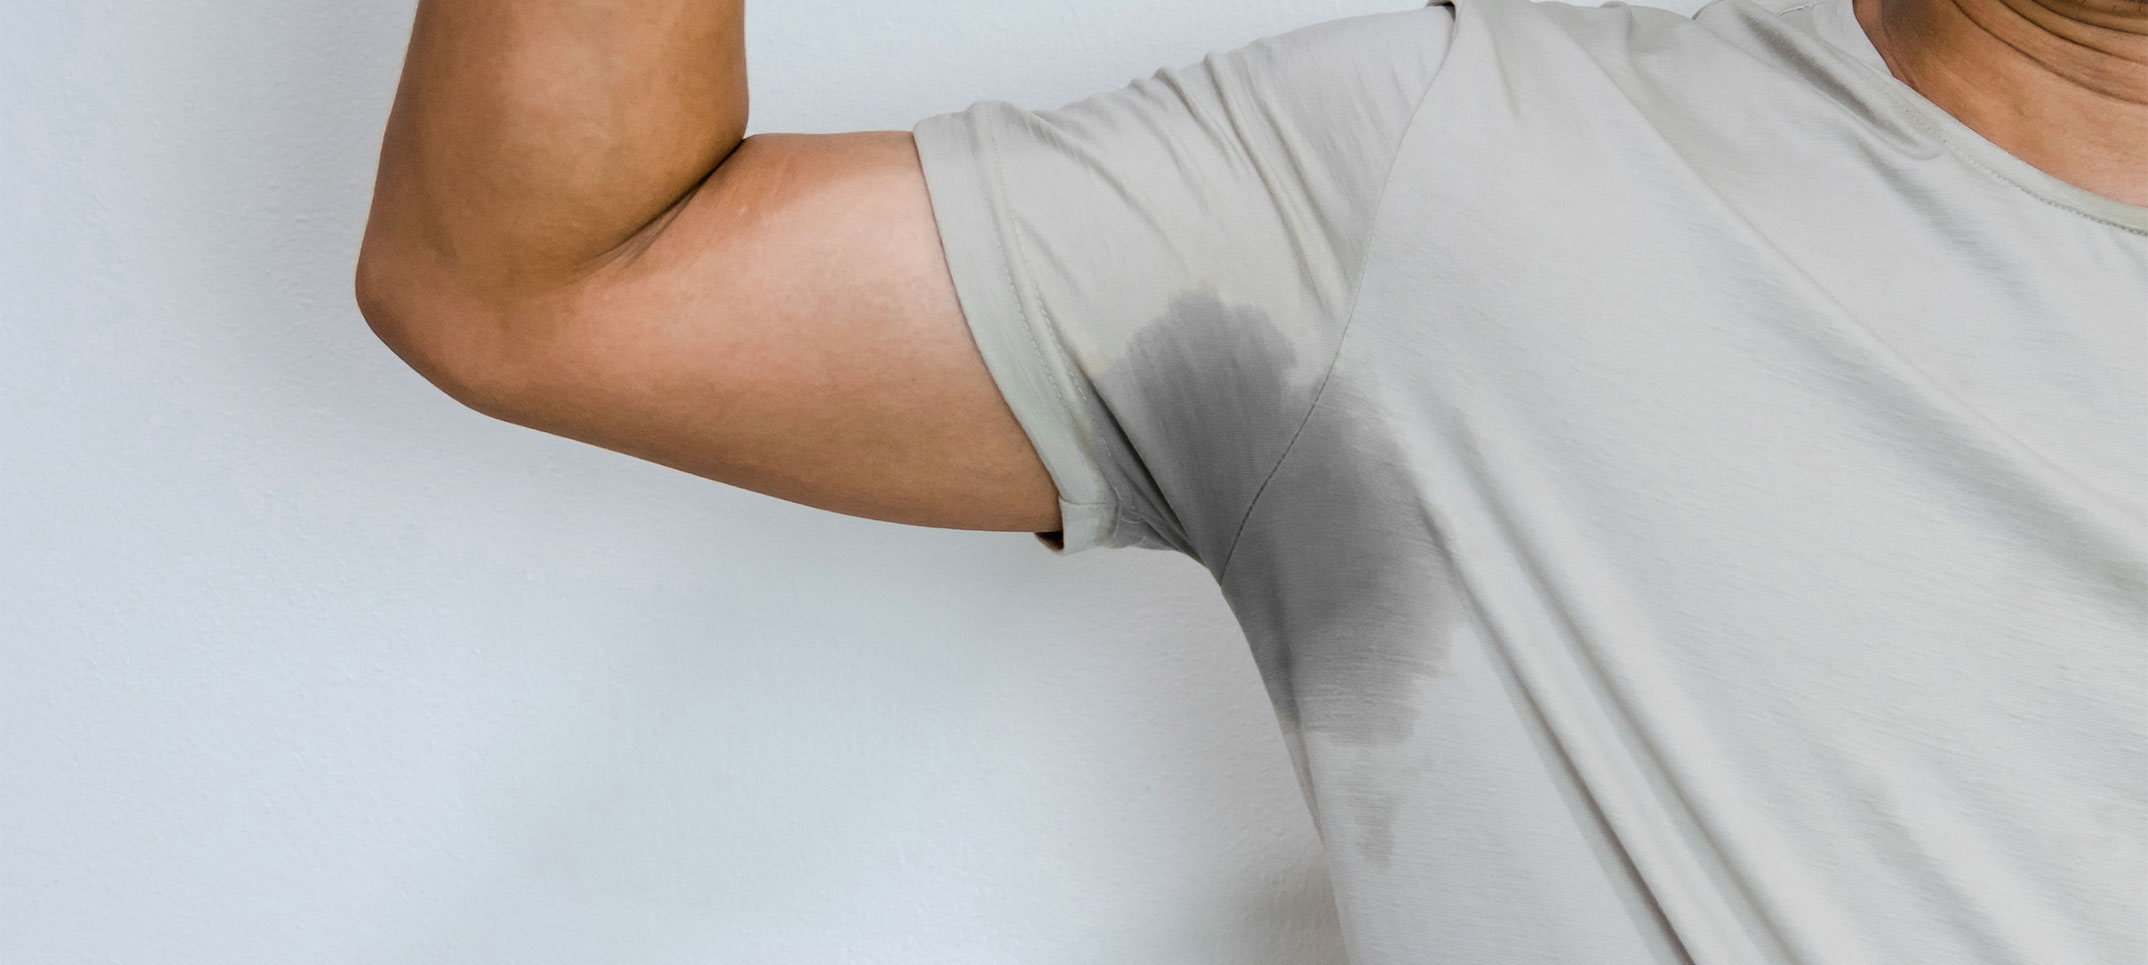 Excessive Sweating Treatment – Chicago Hyperhidrosis Treatments